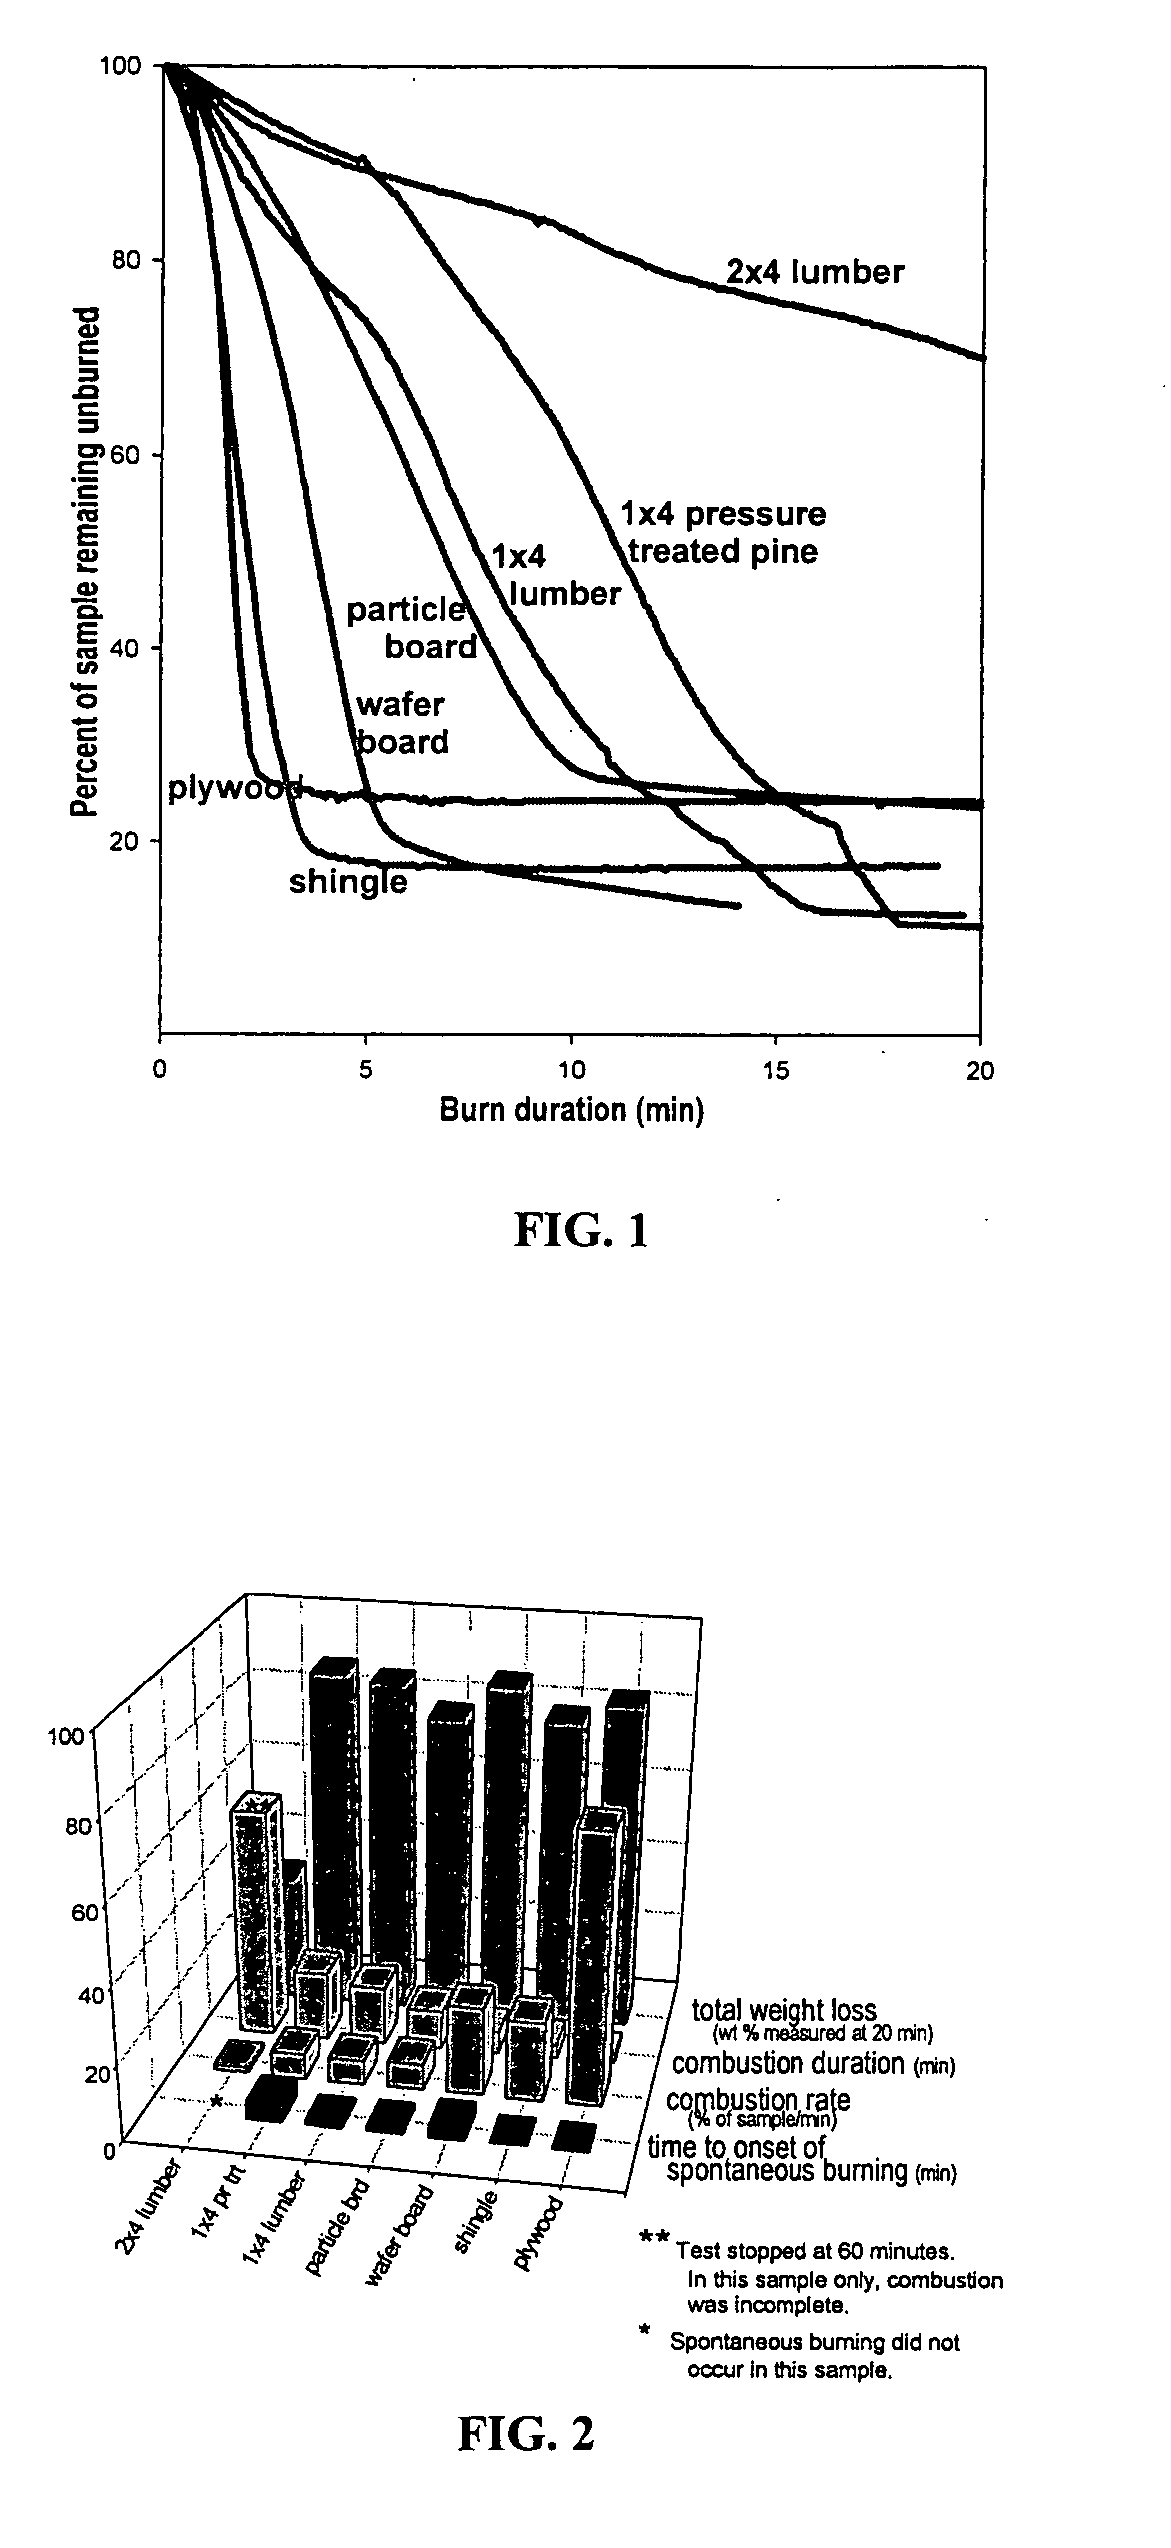 Process of using sodium silicate to create fire retardant products